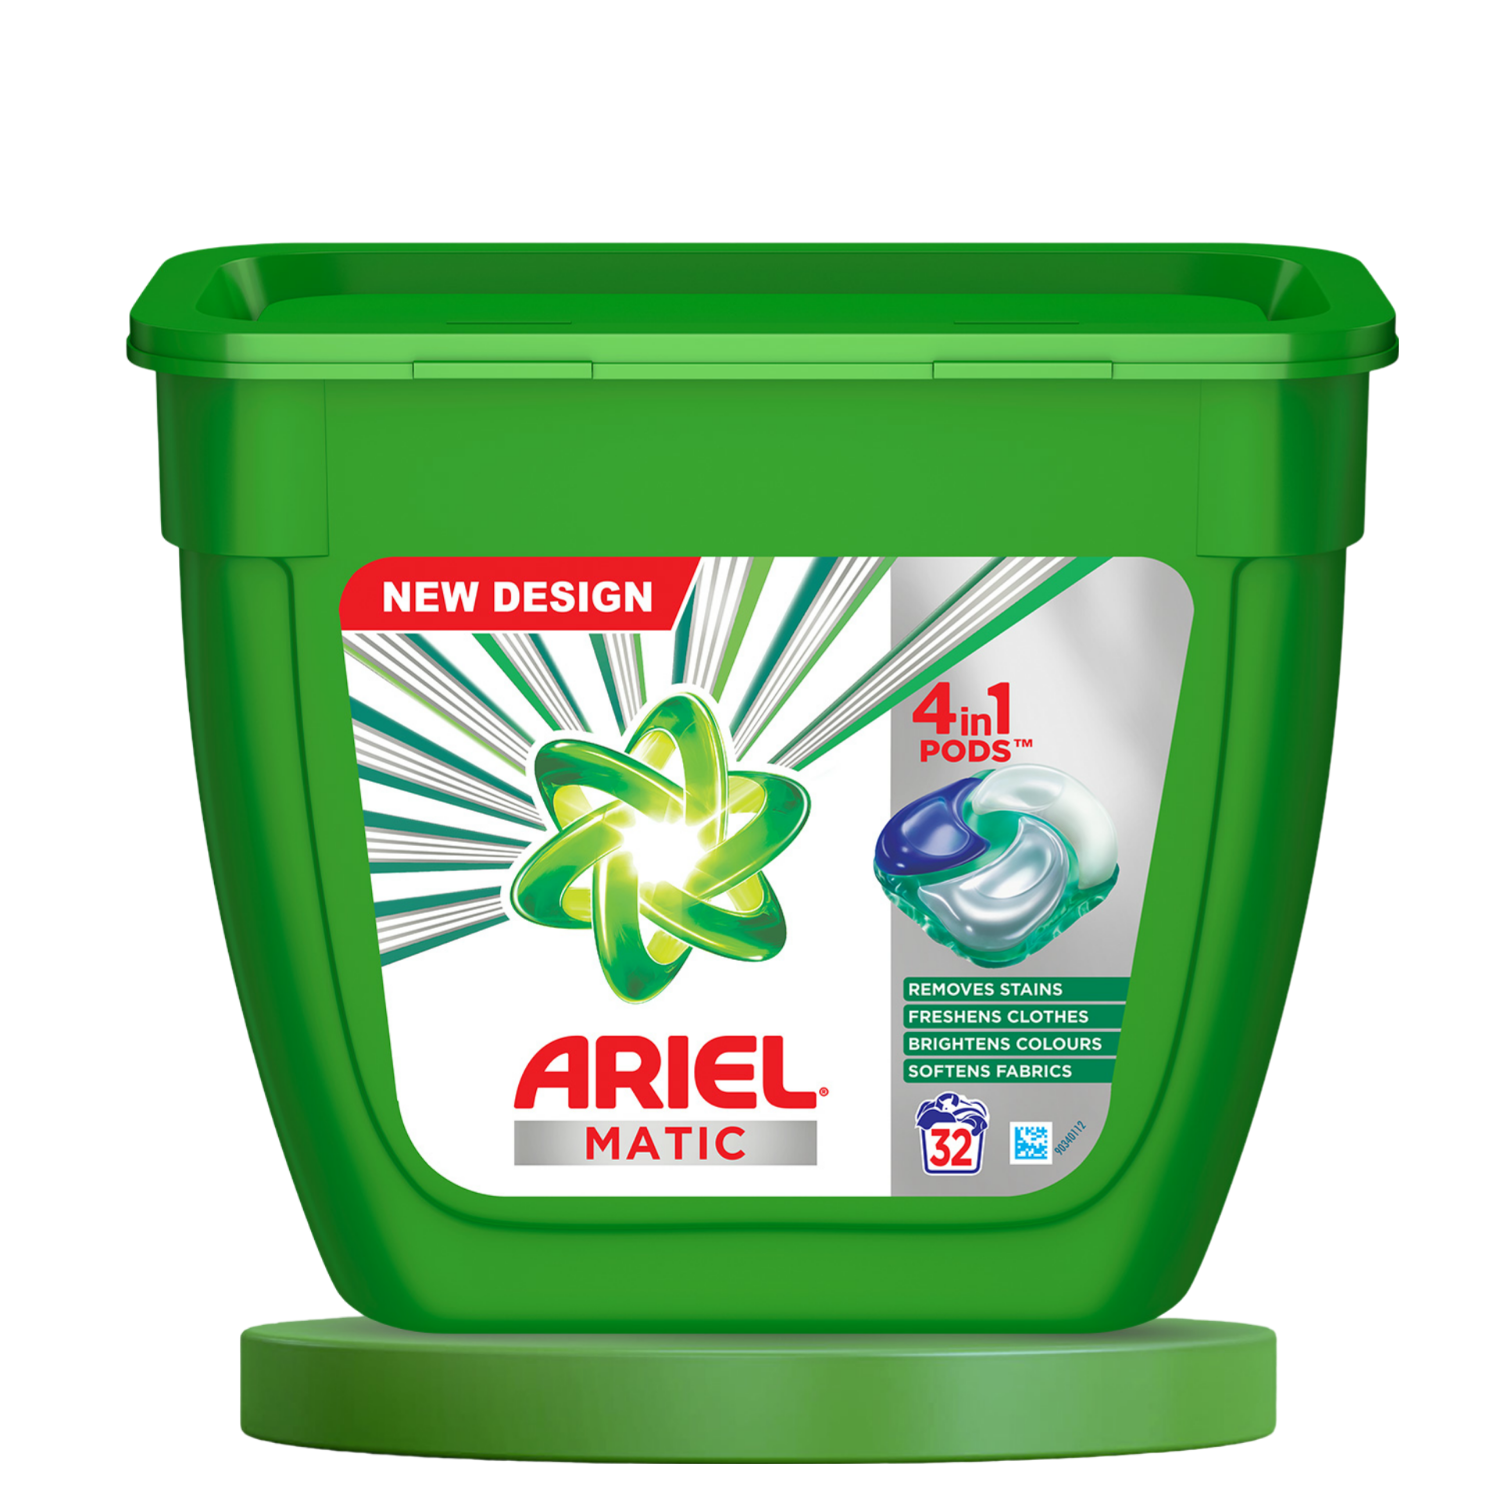 Ariel Matic 4in1 PODs Detergent for Top & Front load washing machine only